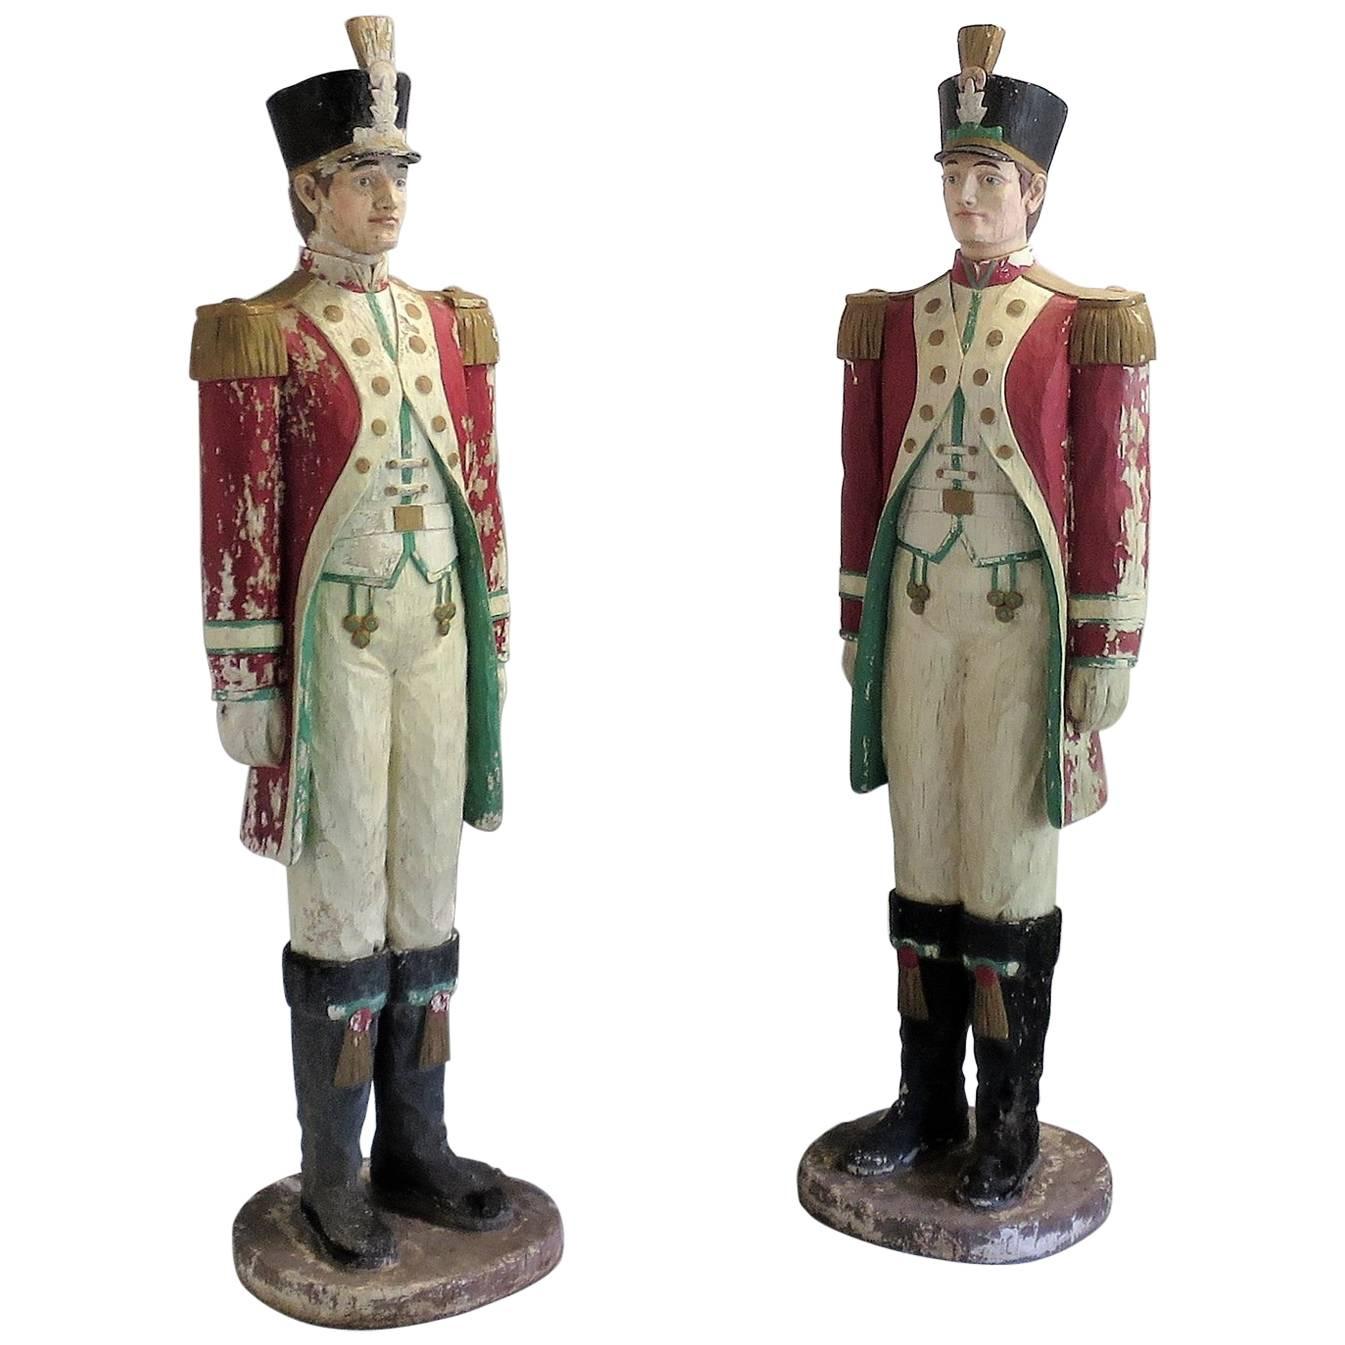 Pair of Handsome Lifesize Military Guards in Uniform Midcentury Sculptures